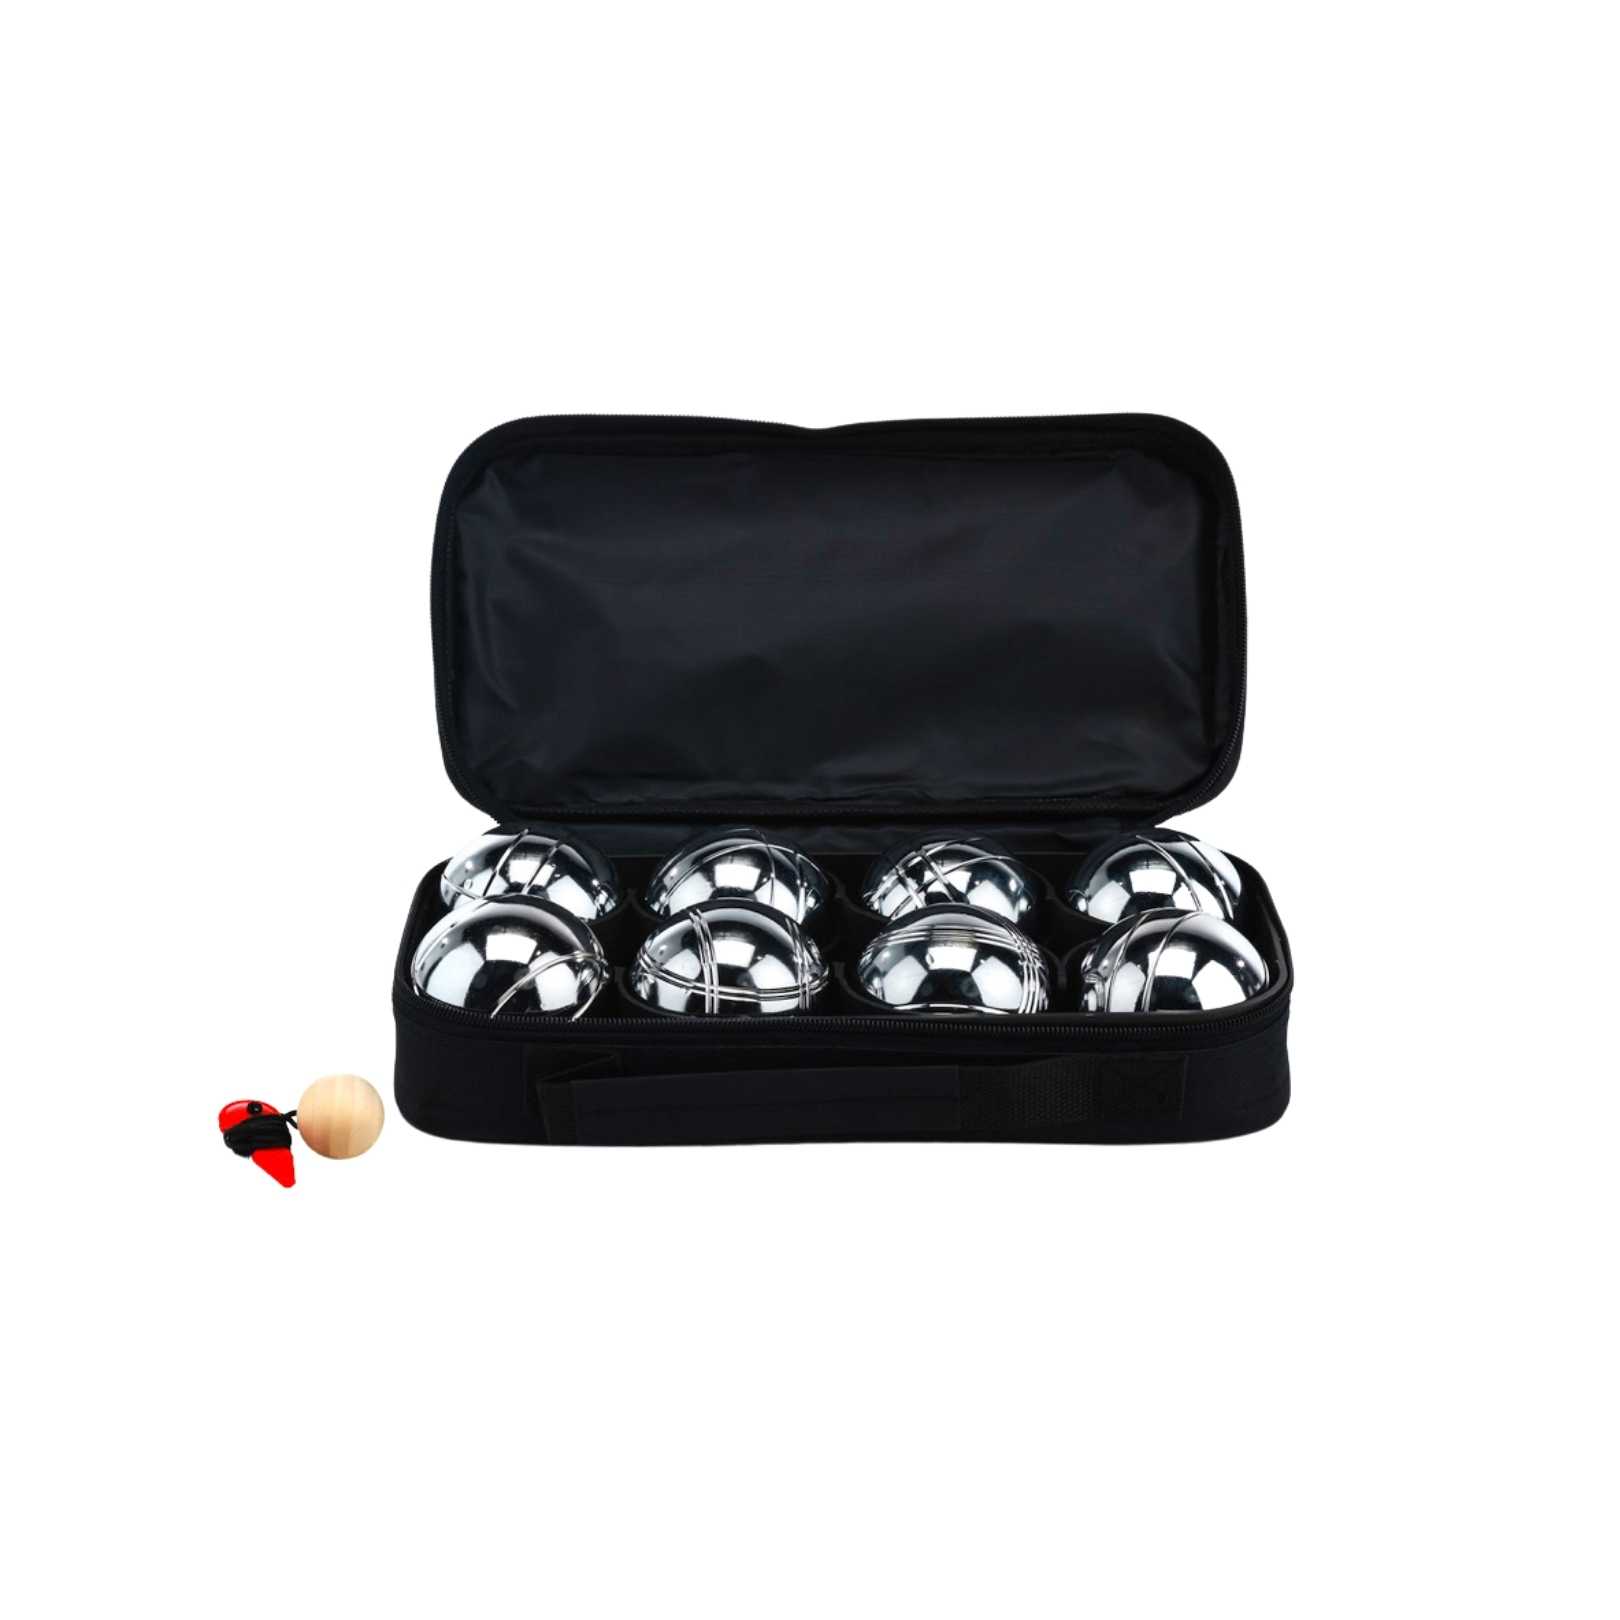 Deluxe 8 Metal Bowls Bocce/Petanque Game Set Silver w/ Rules